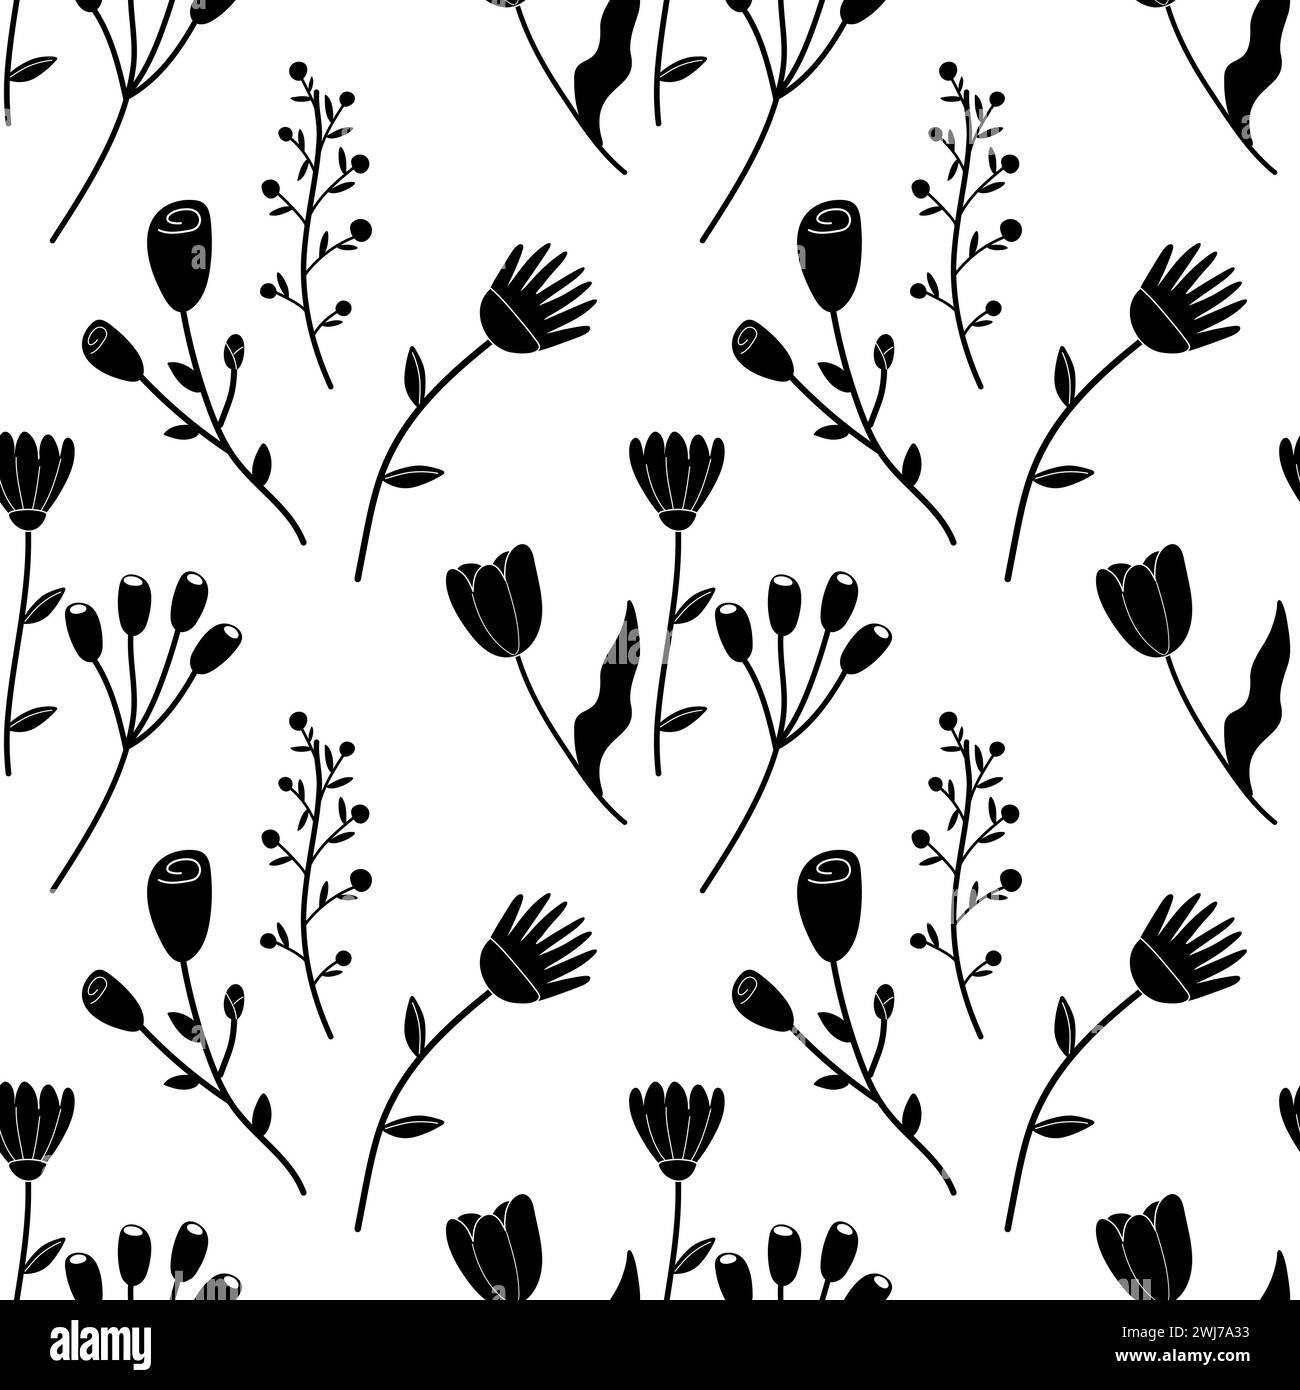 Seamless floral spring flowers silhouettes black white illustration. For your design, wrapping paper, fabric. Stock Vector